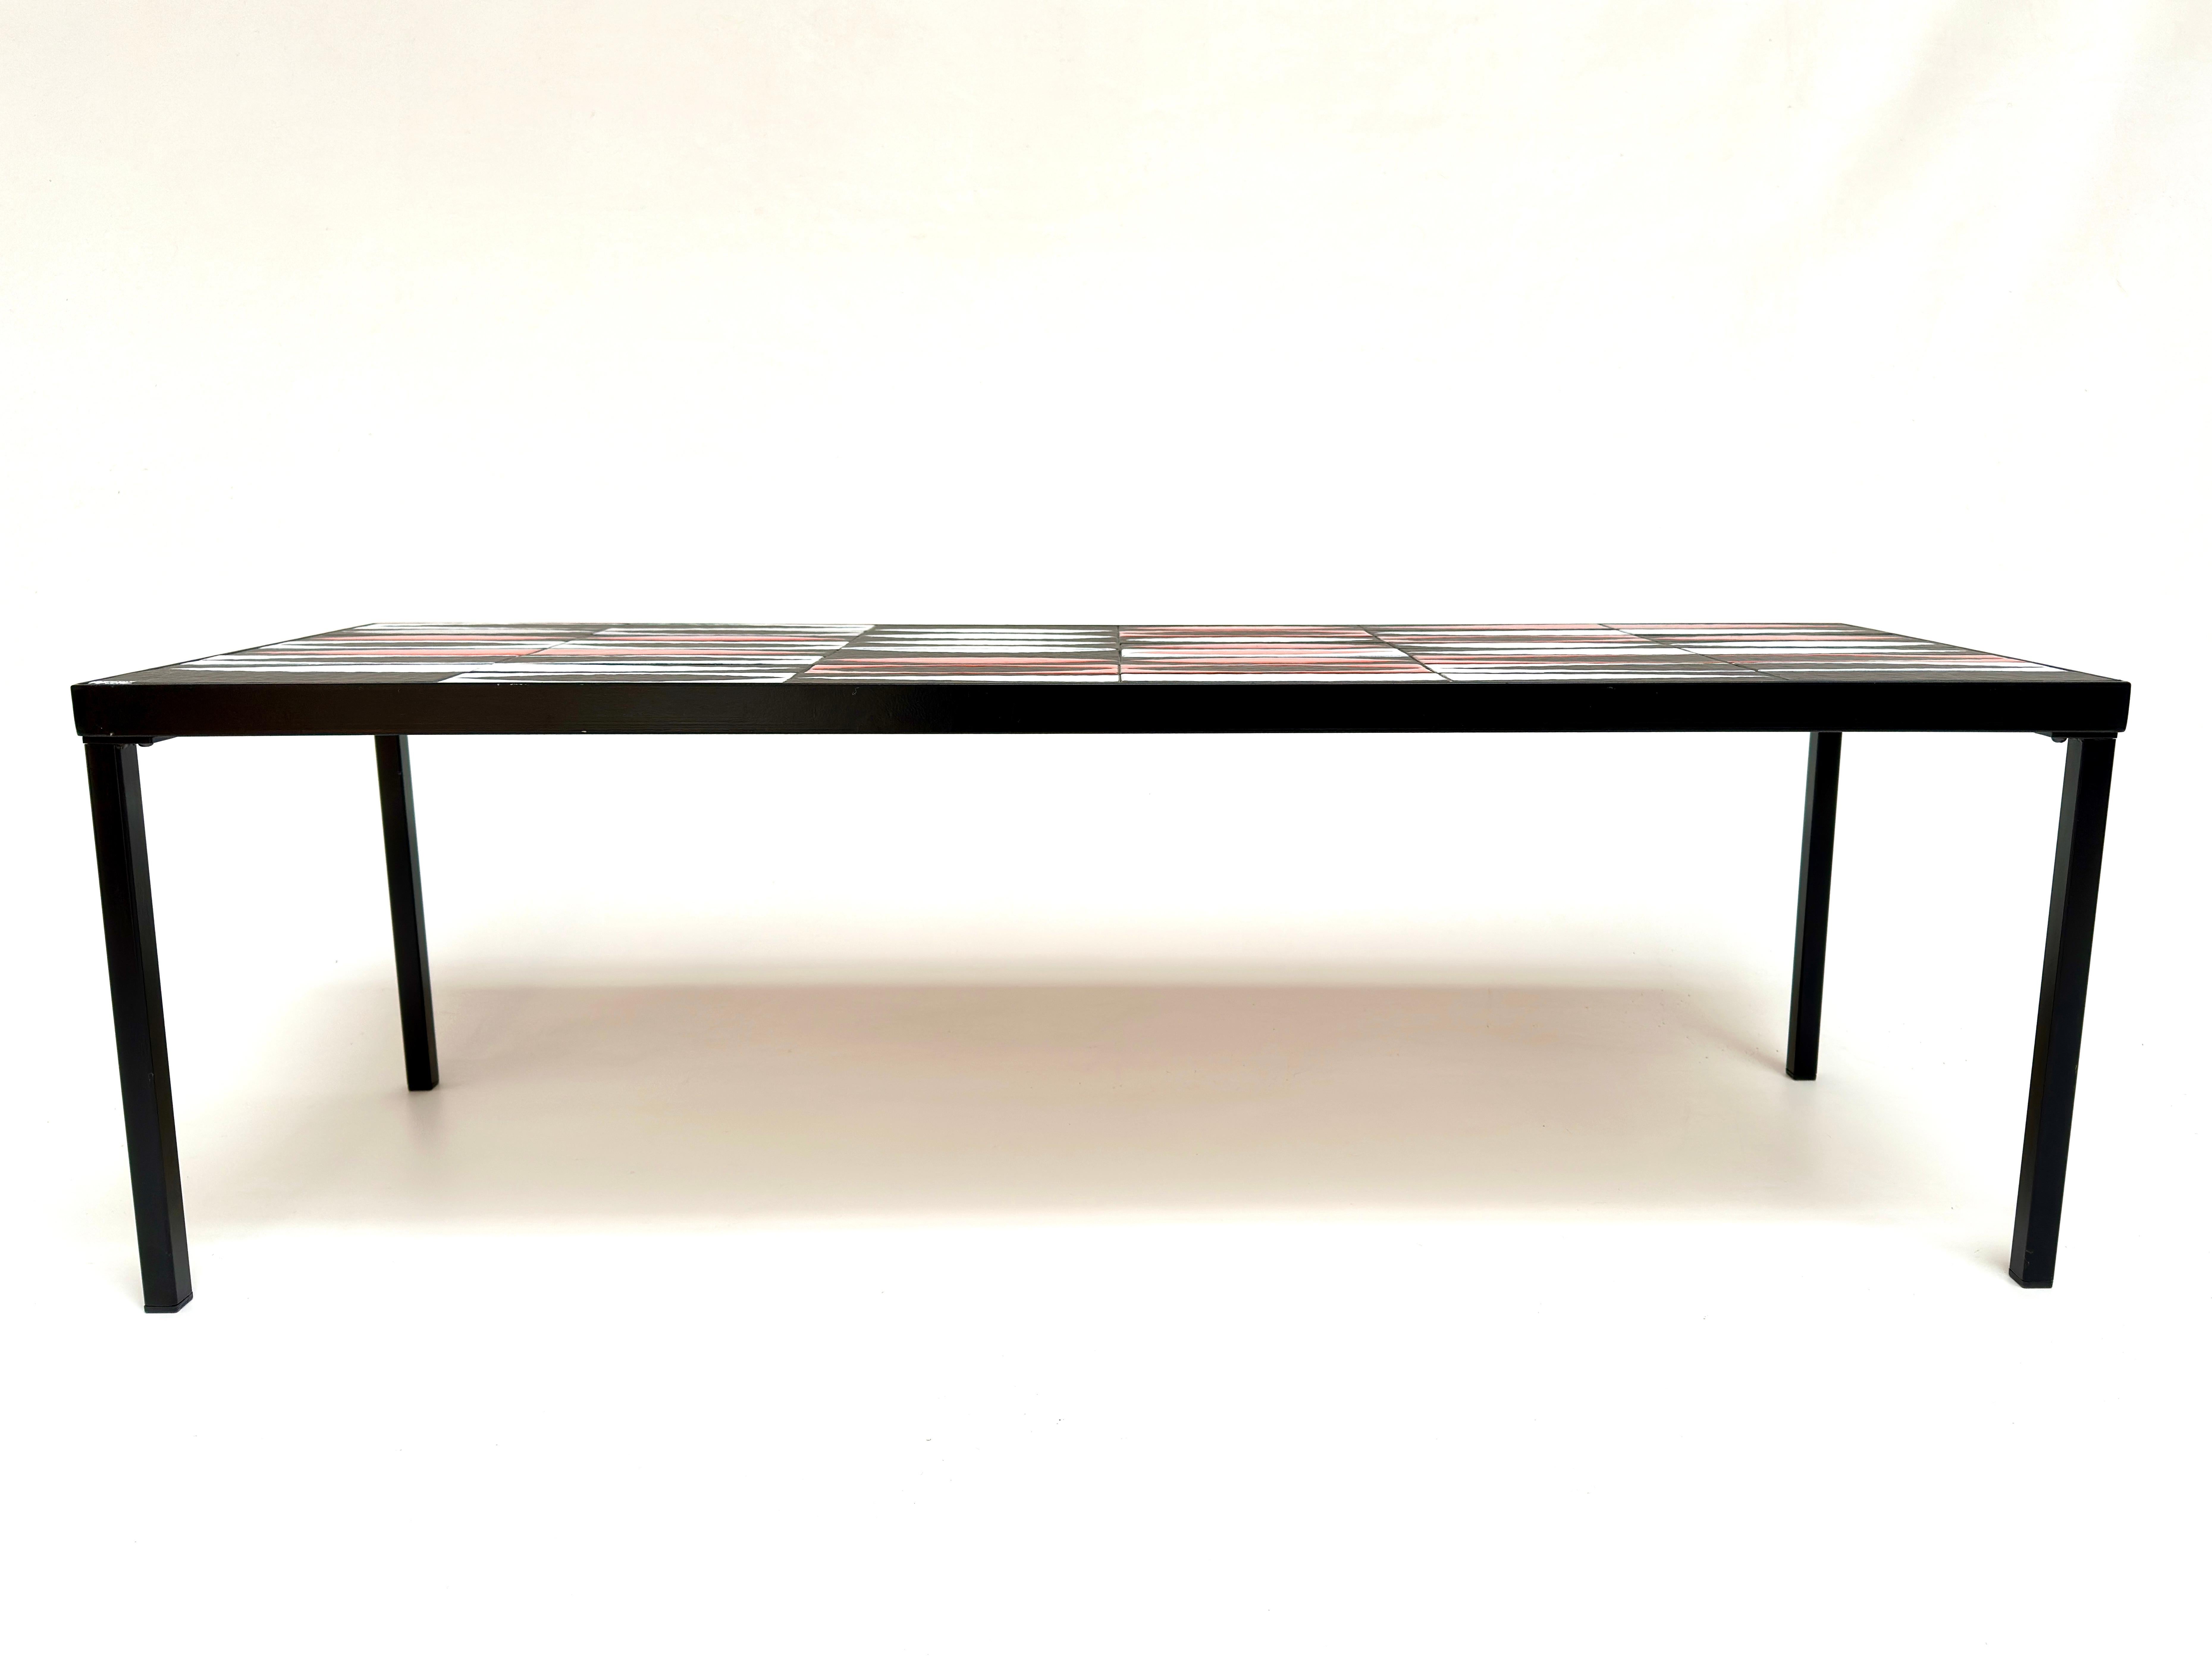 Glazed Iconic Navettes Low Table, Roger Capron, Vallauris c. 1960 For Sale